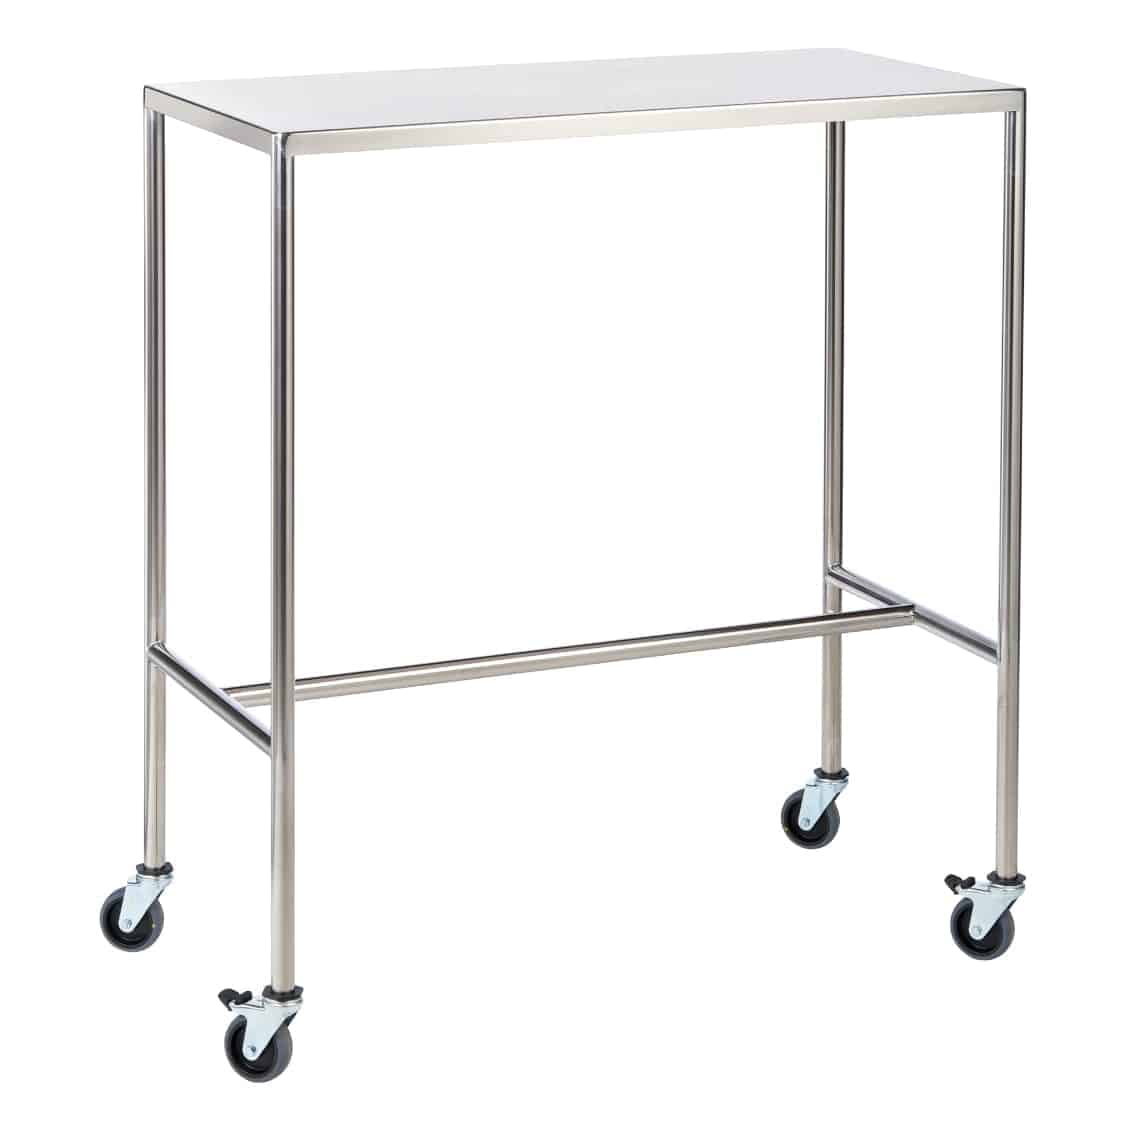 Special Instrument Trolley - Option 2